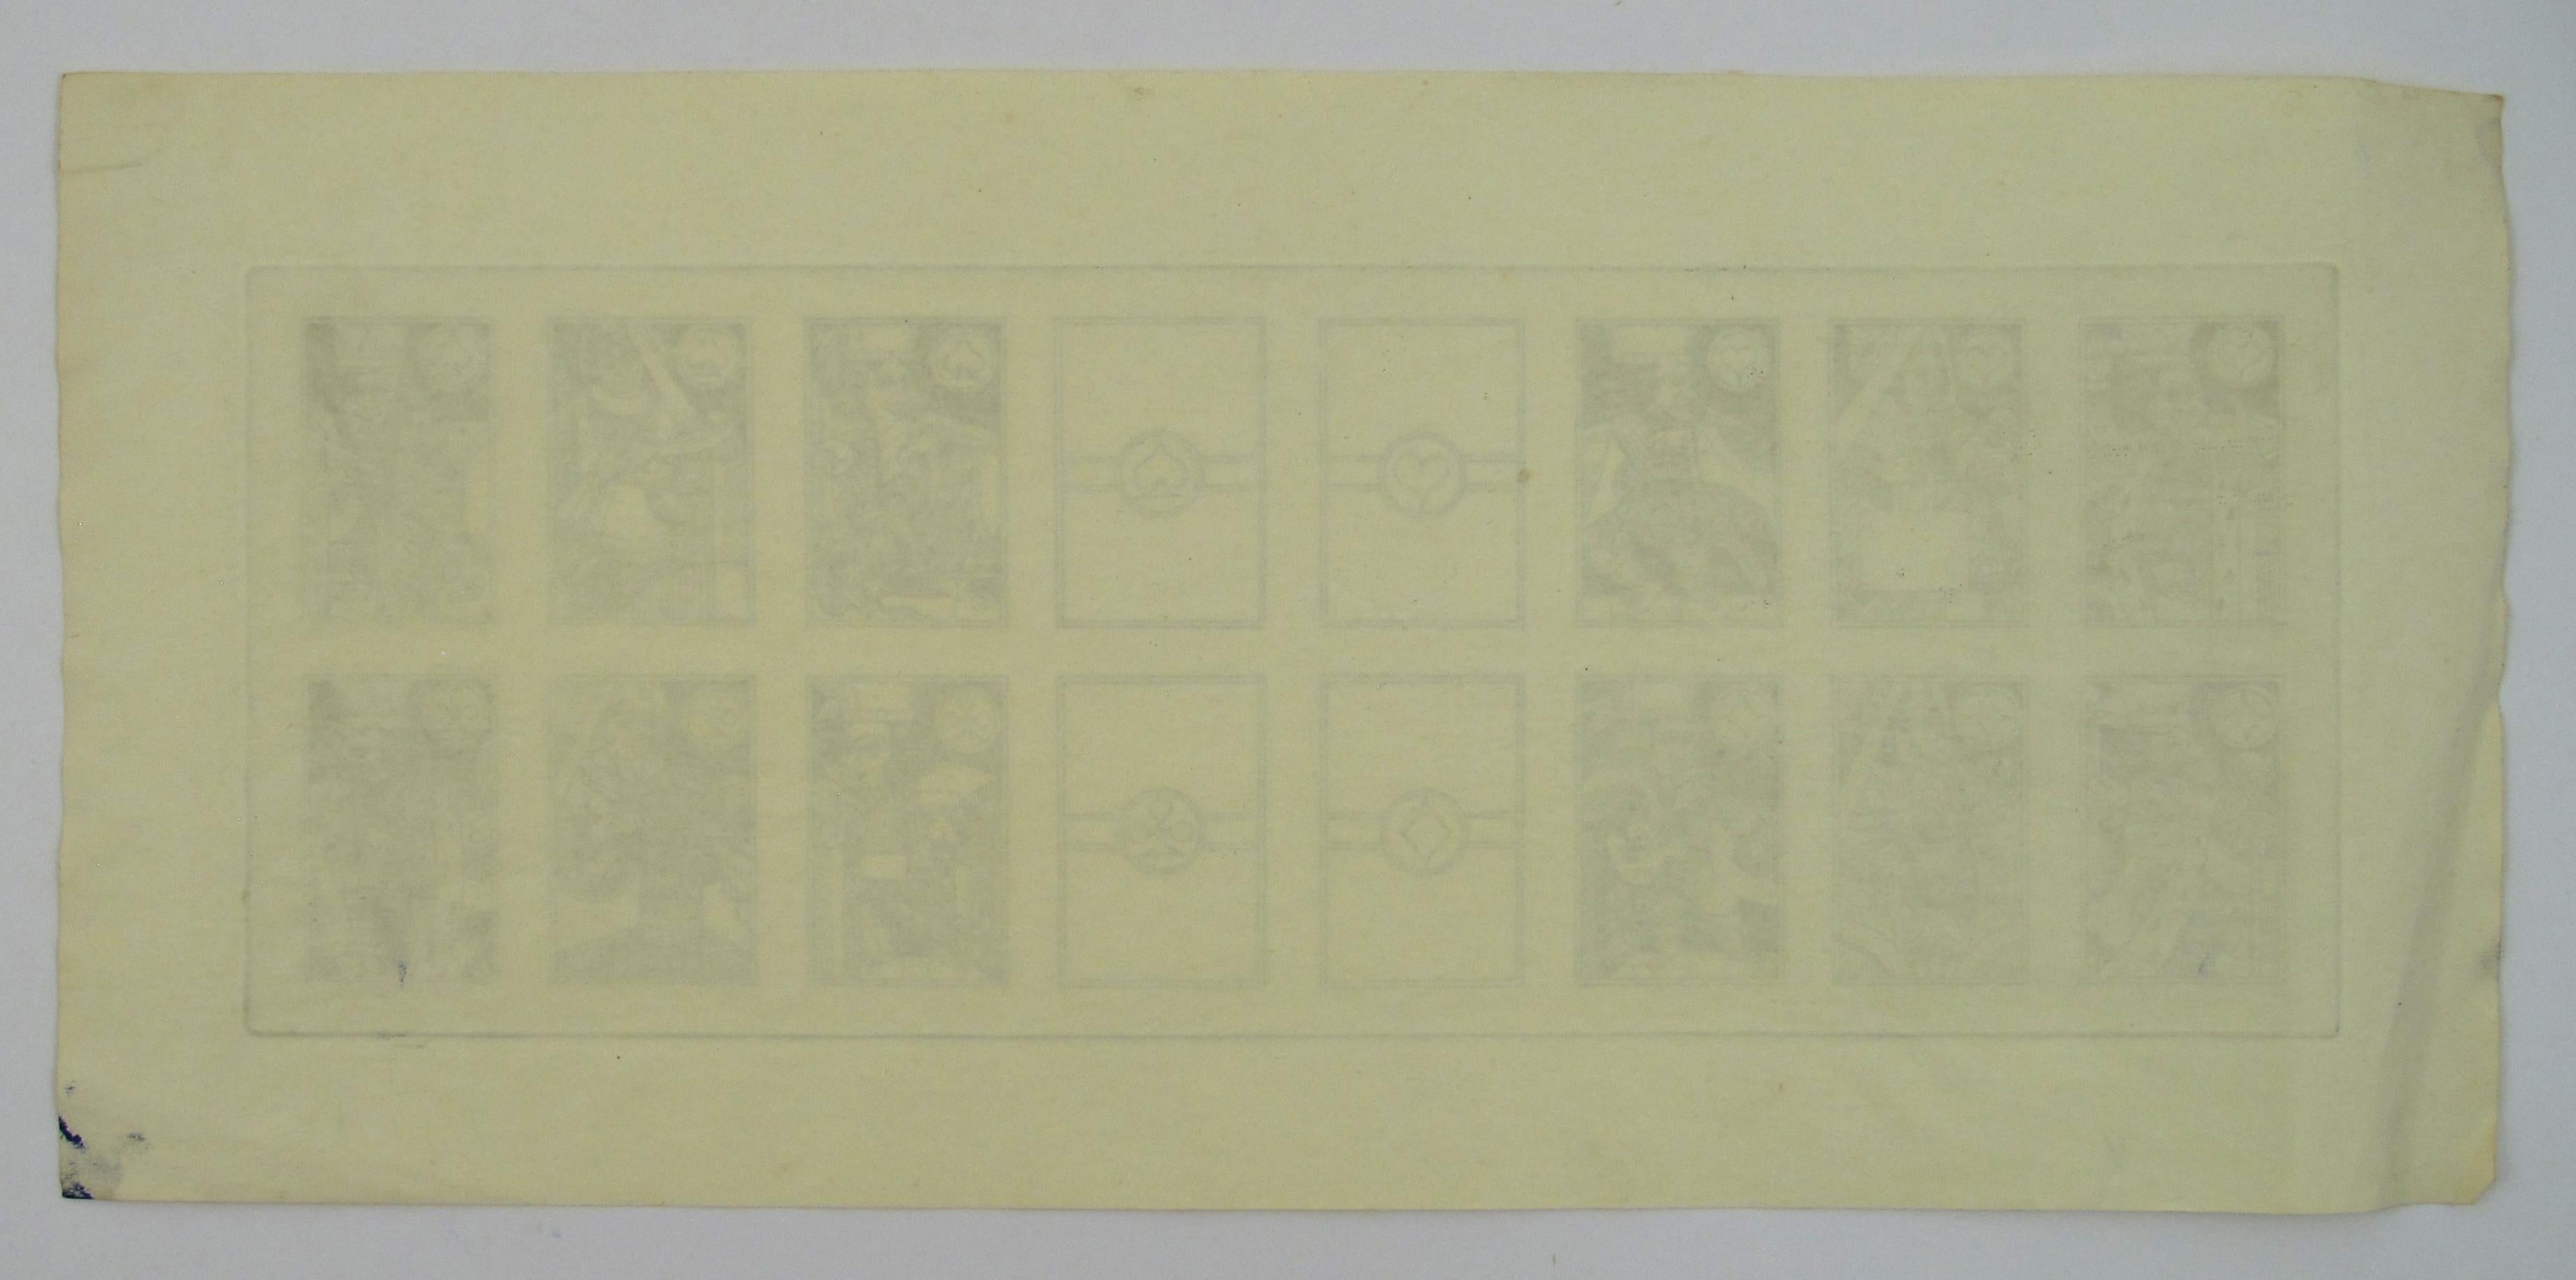 Gerich No. 7, 1984,  by Karl Gerich of Bath - Playing Card Print Sheet For Sale 3